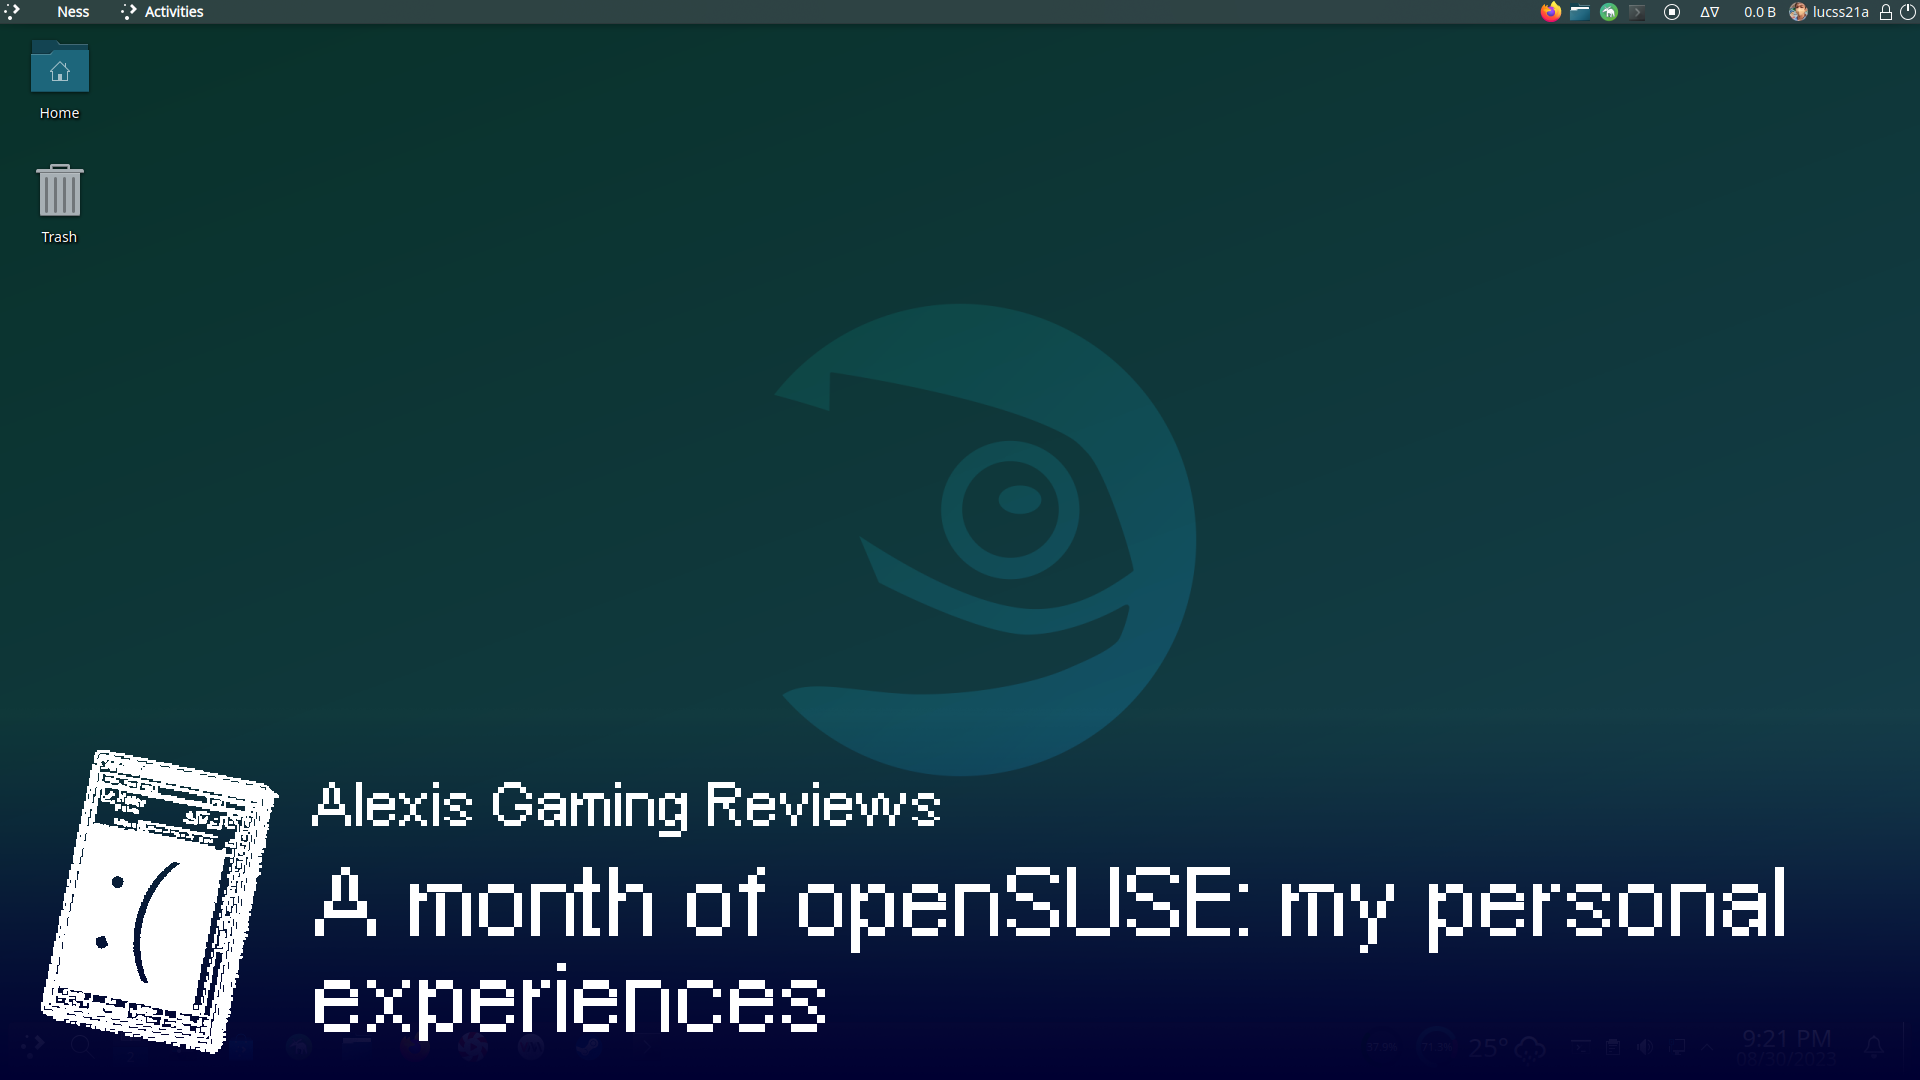 A month of openSUSE: my personal experiences